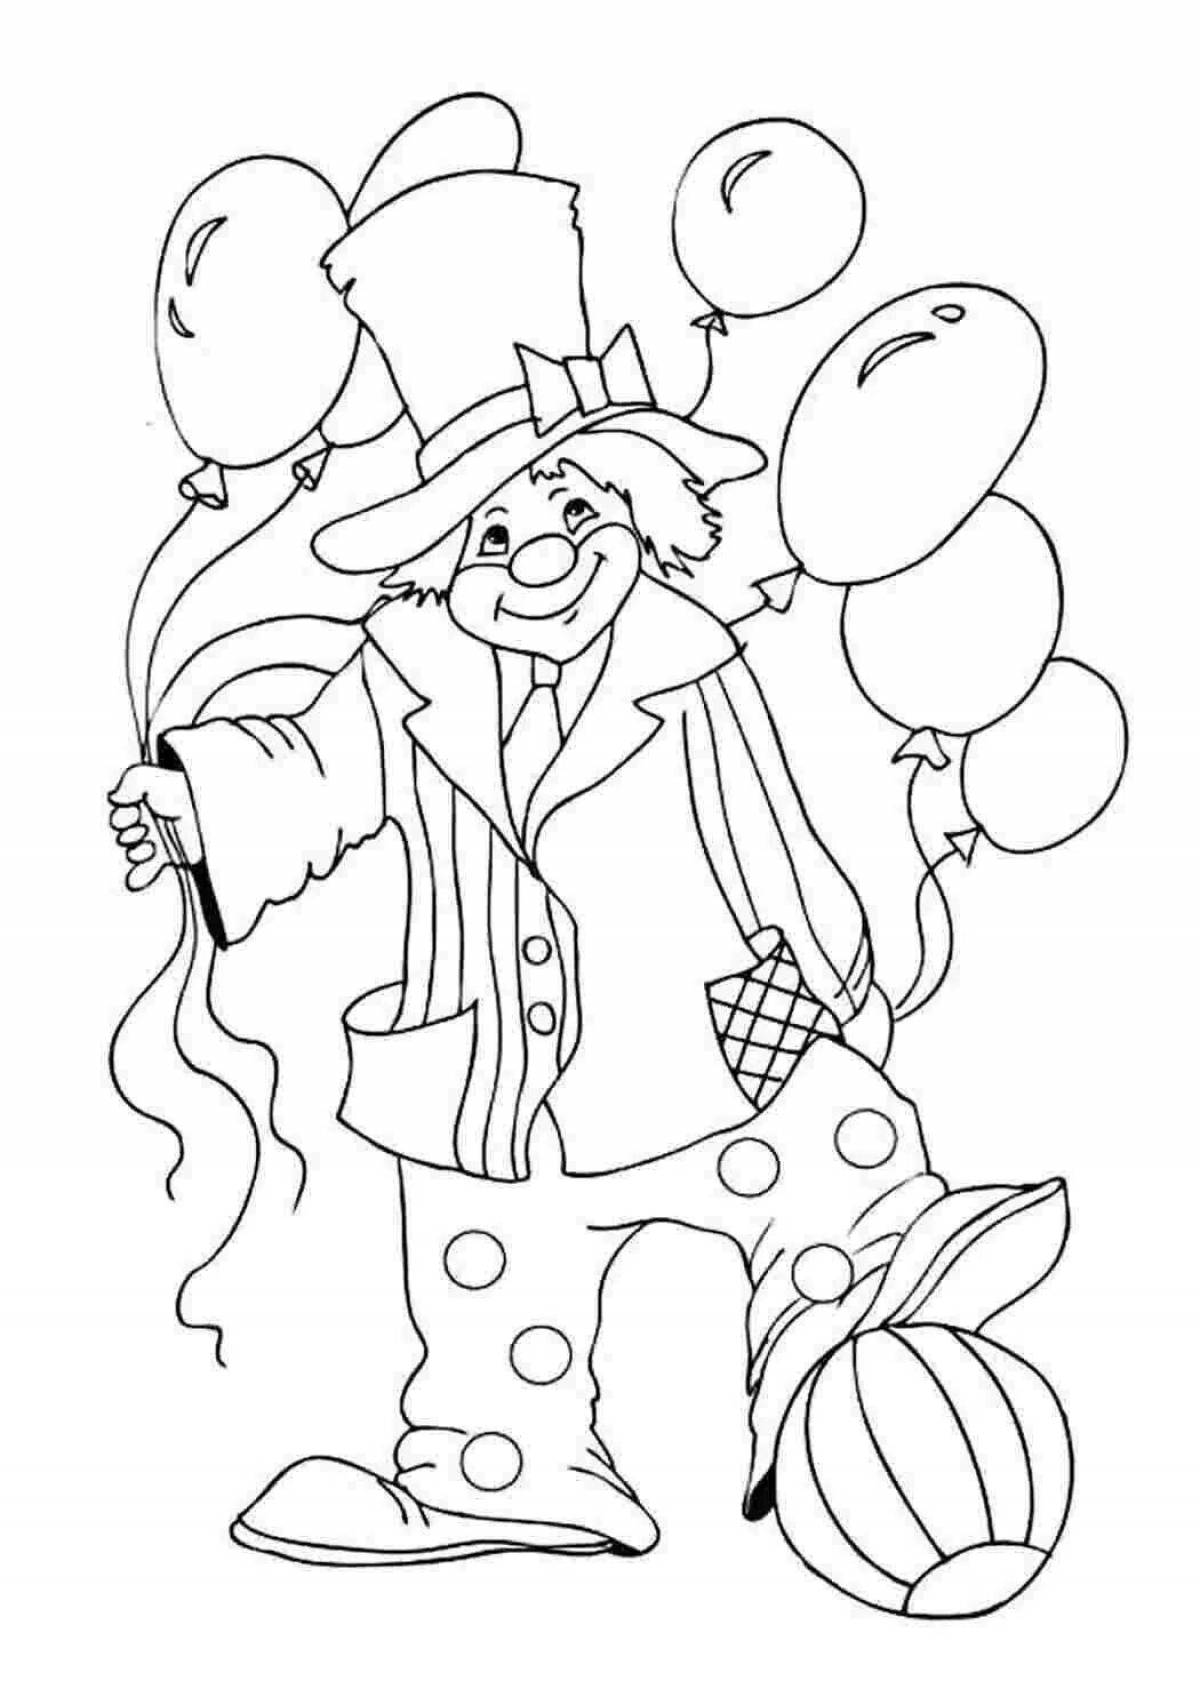 Fun circus coloring book for little ones